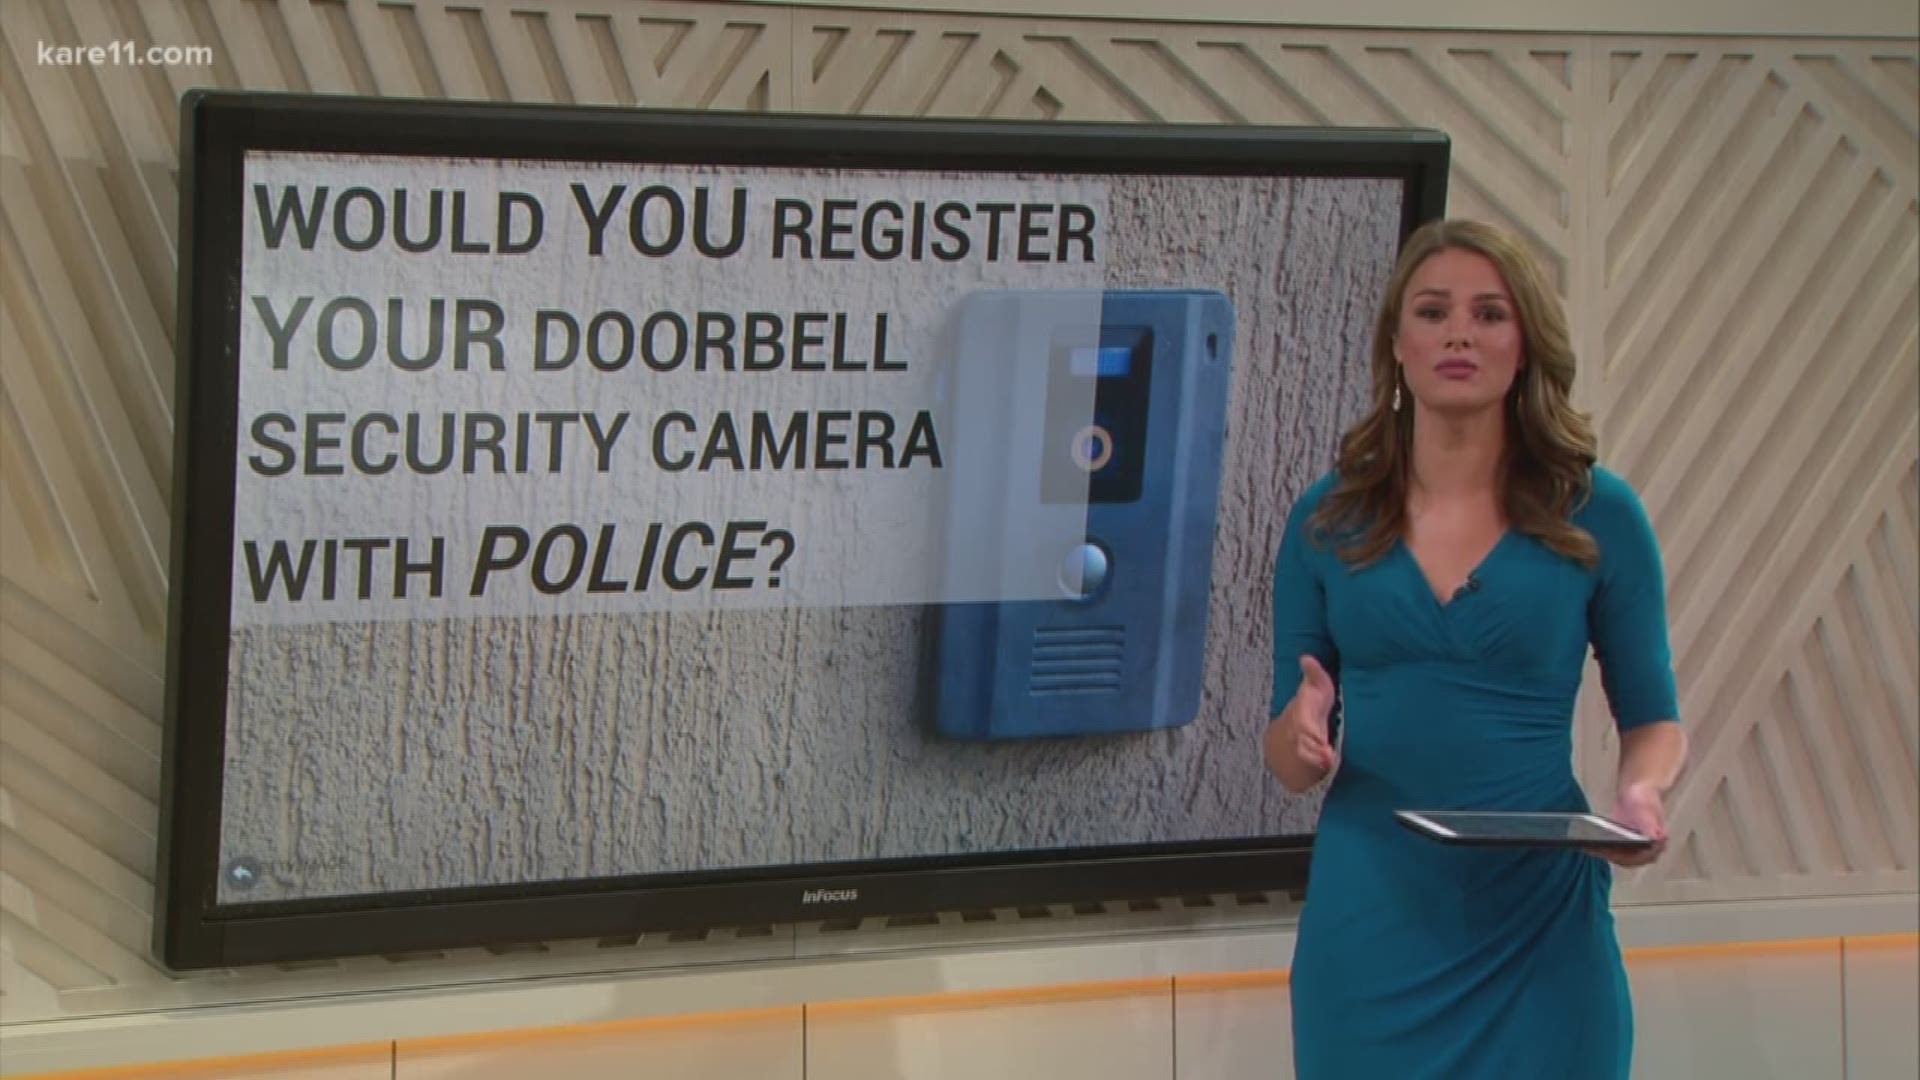 As doorbell cameras become more prevalent they are capturing more and more incidents, including crimes being committed. Now police in some communities are trying to marshal those cameras as a crime-fighting tool.